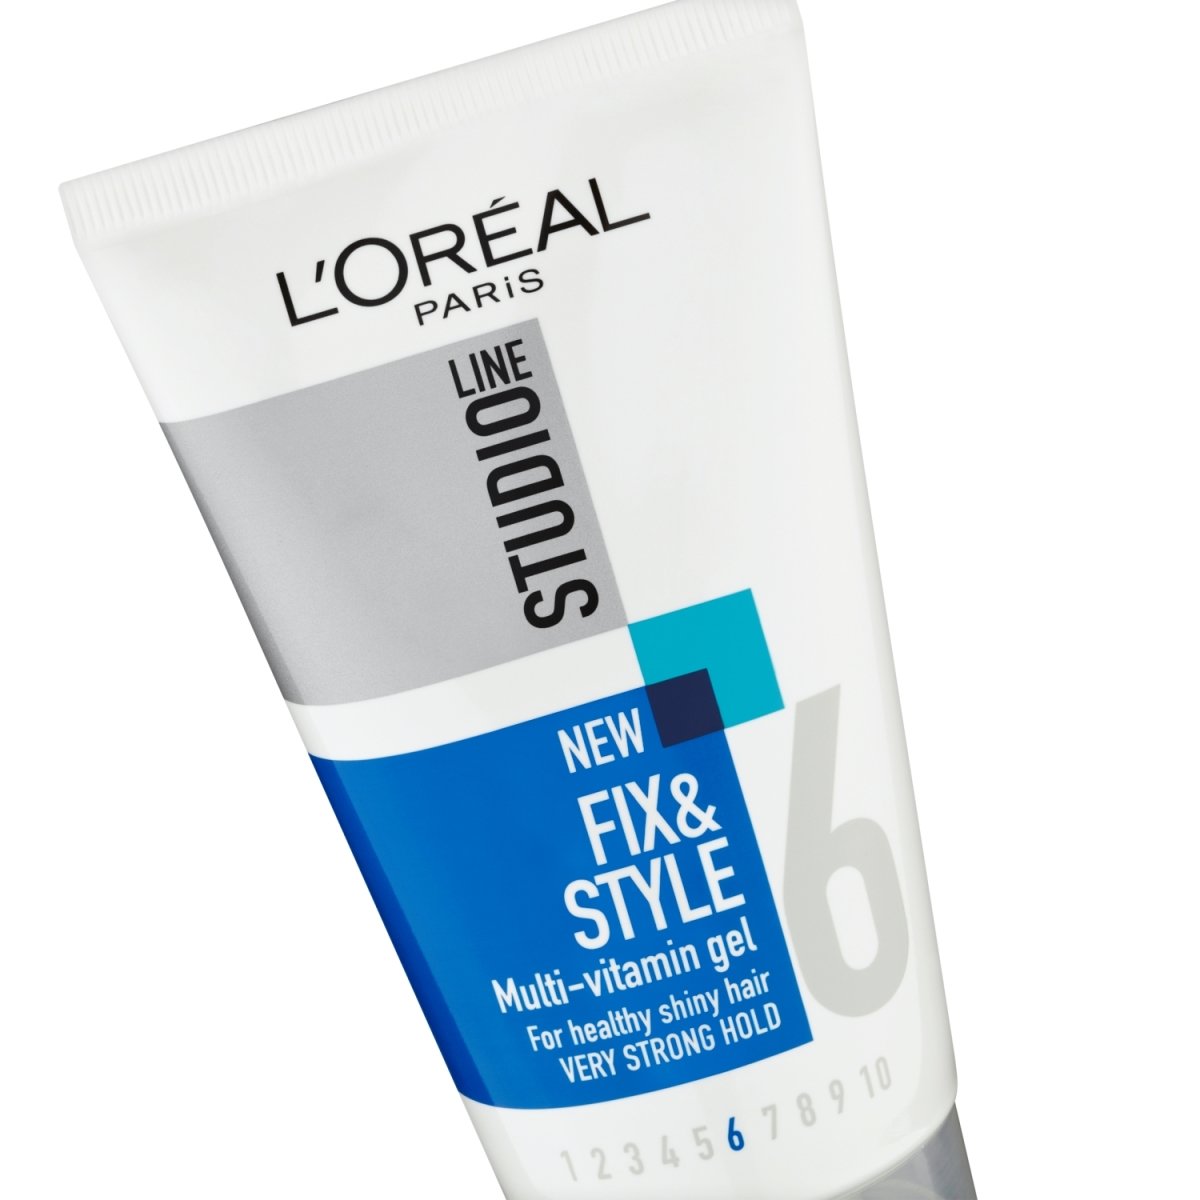 L oreal Homme Clear Fix Gel 150 ml